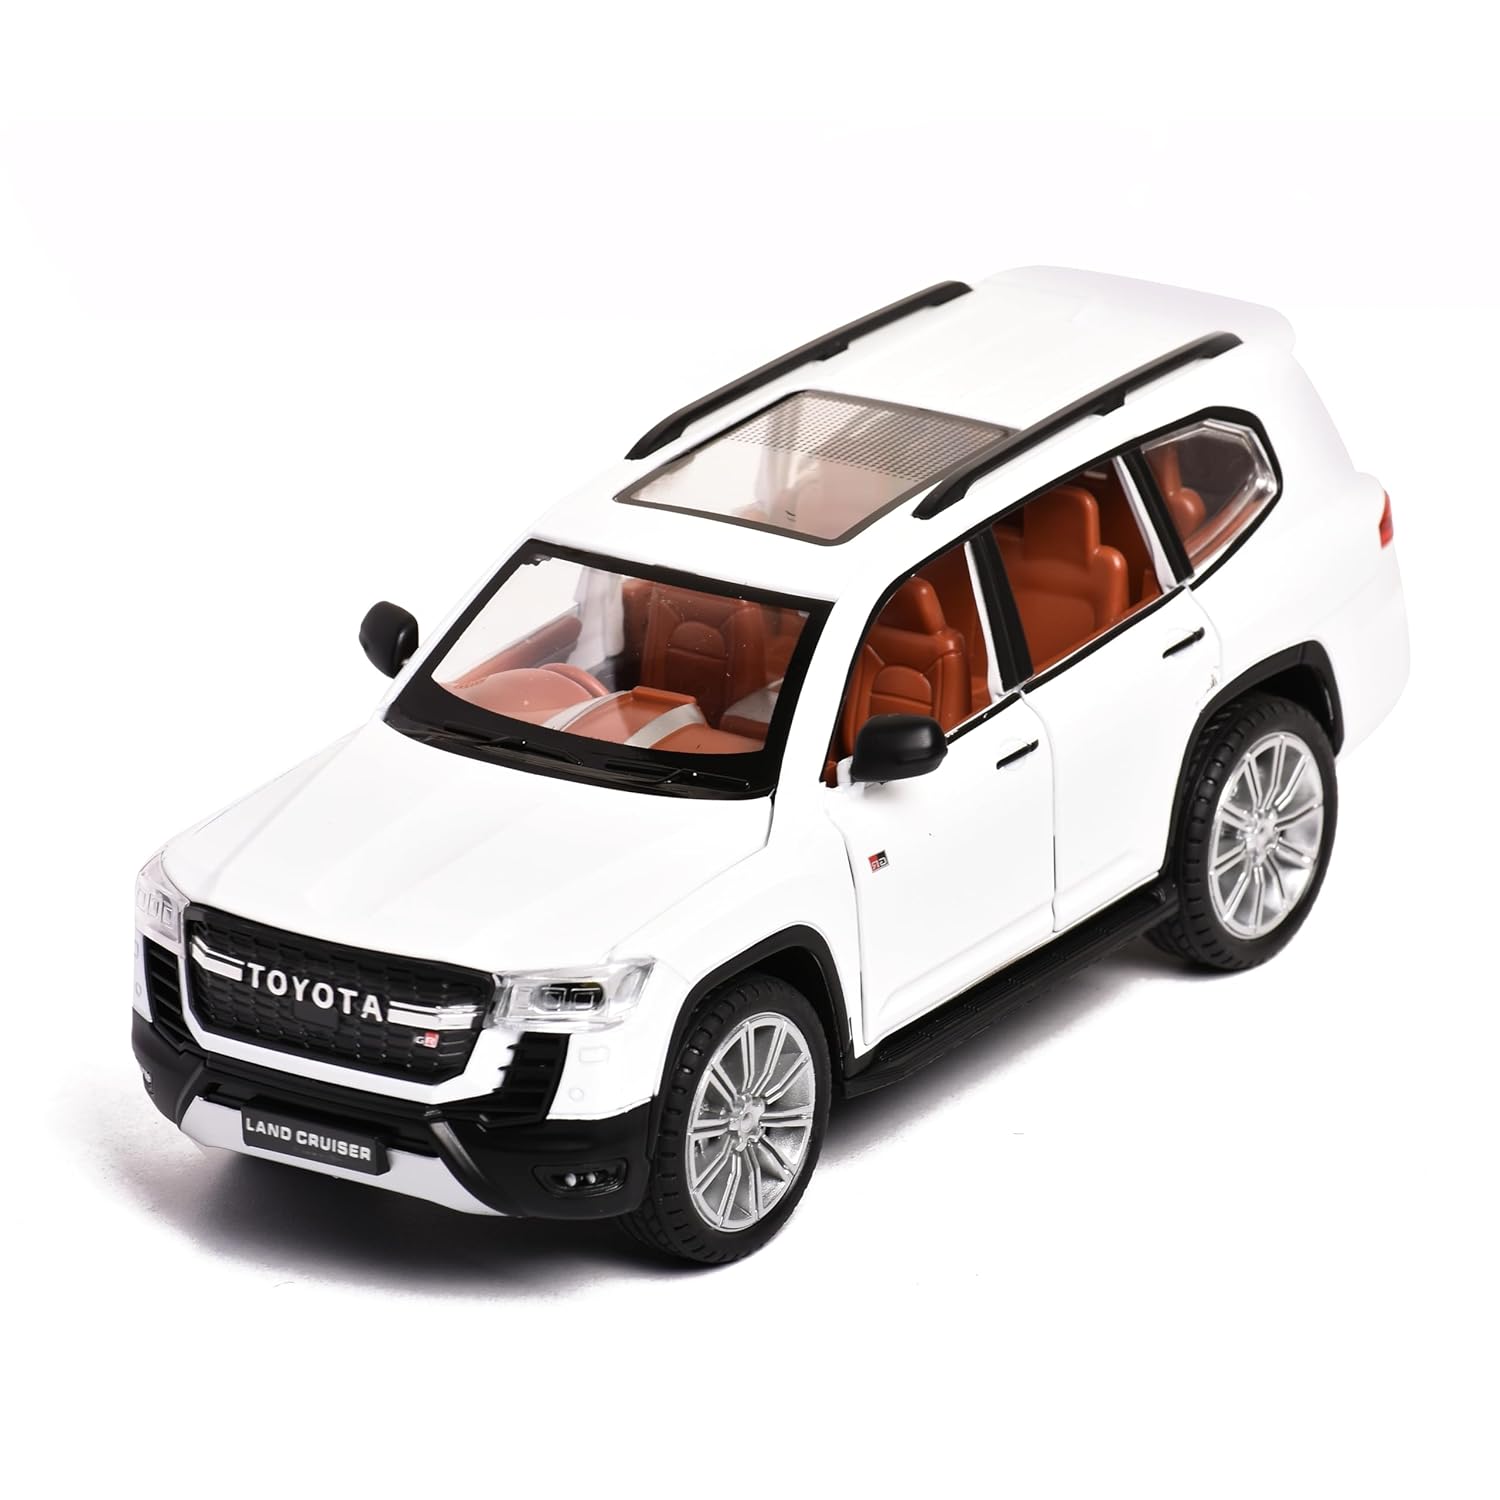 Braintastic Model Diecast Car Toy Vehicle Pull Back Friction Car with Openable Doors Light & Music Toys for Kids Age 3+ Years (Land Cruiser White)